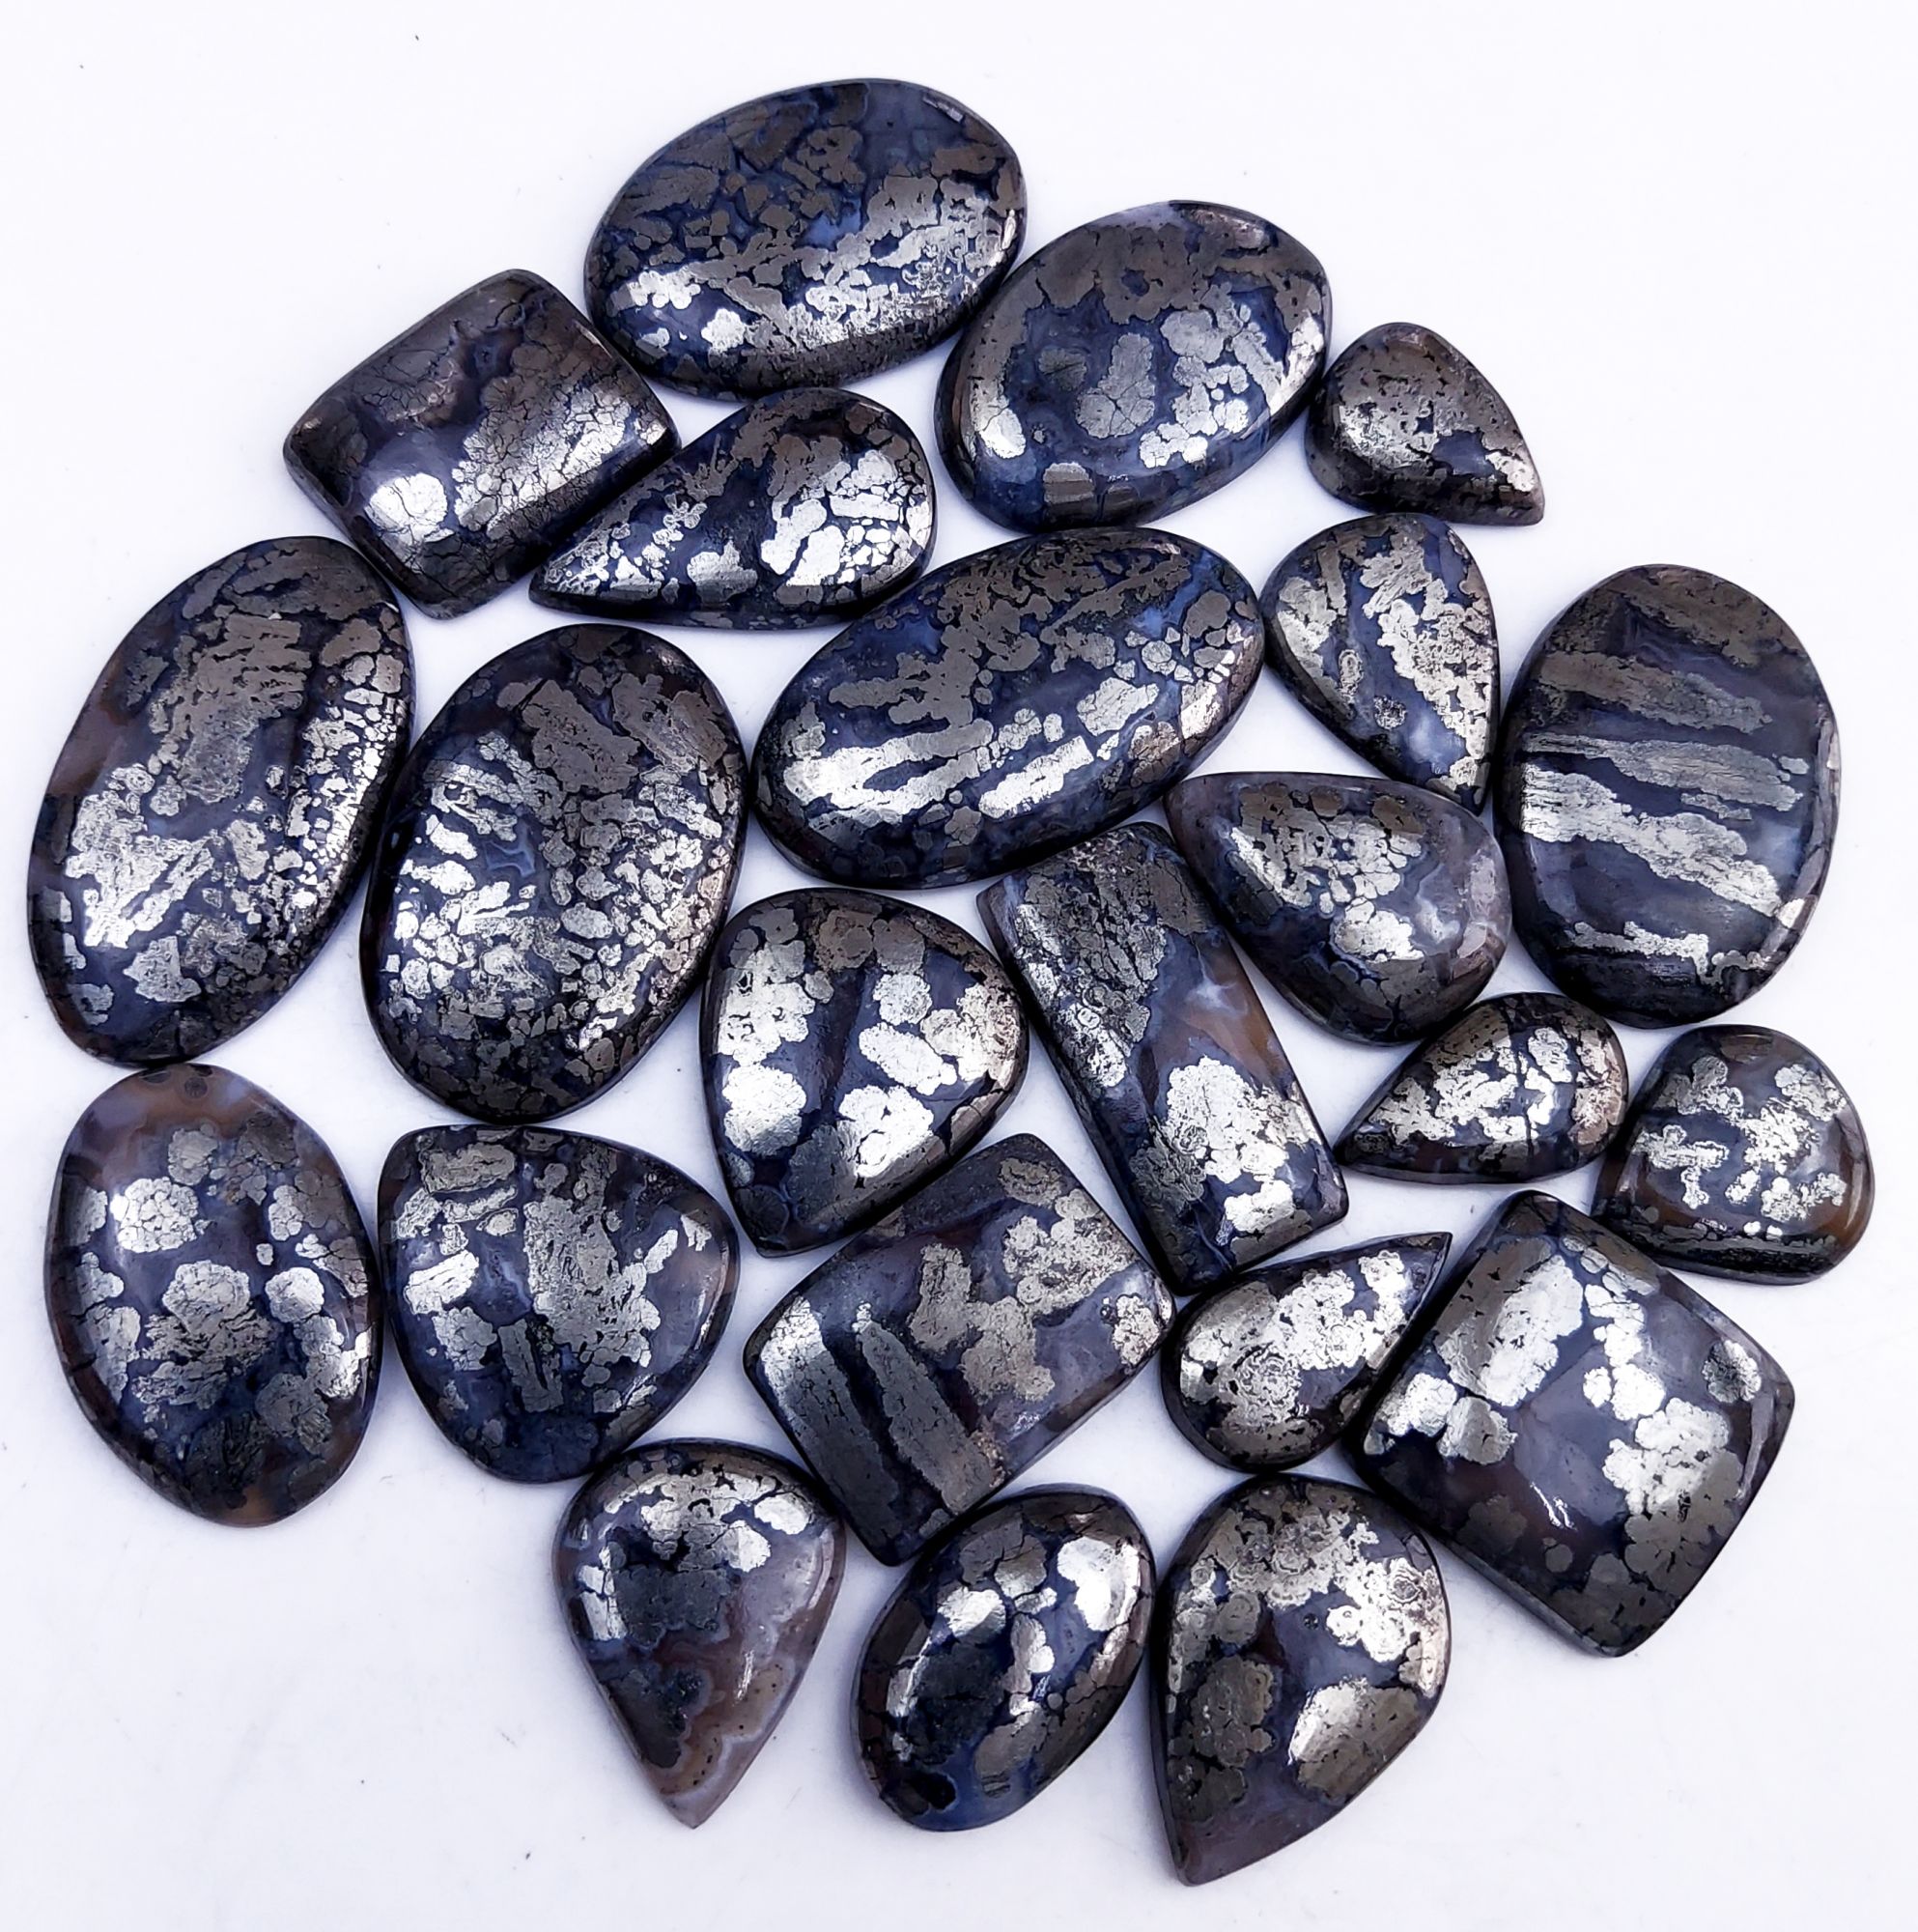 23Pcs 718Cts Natural Marcasite Grey Cabochon Back Side Unpolished Gemstone Semi-Precious Gemstones For Jewelry Making 38x20 18x14mm #10038